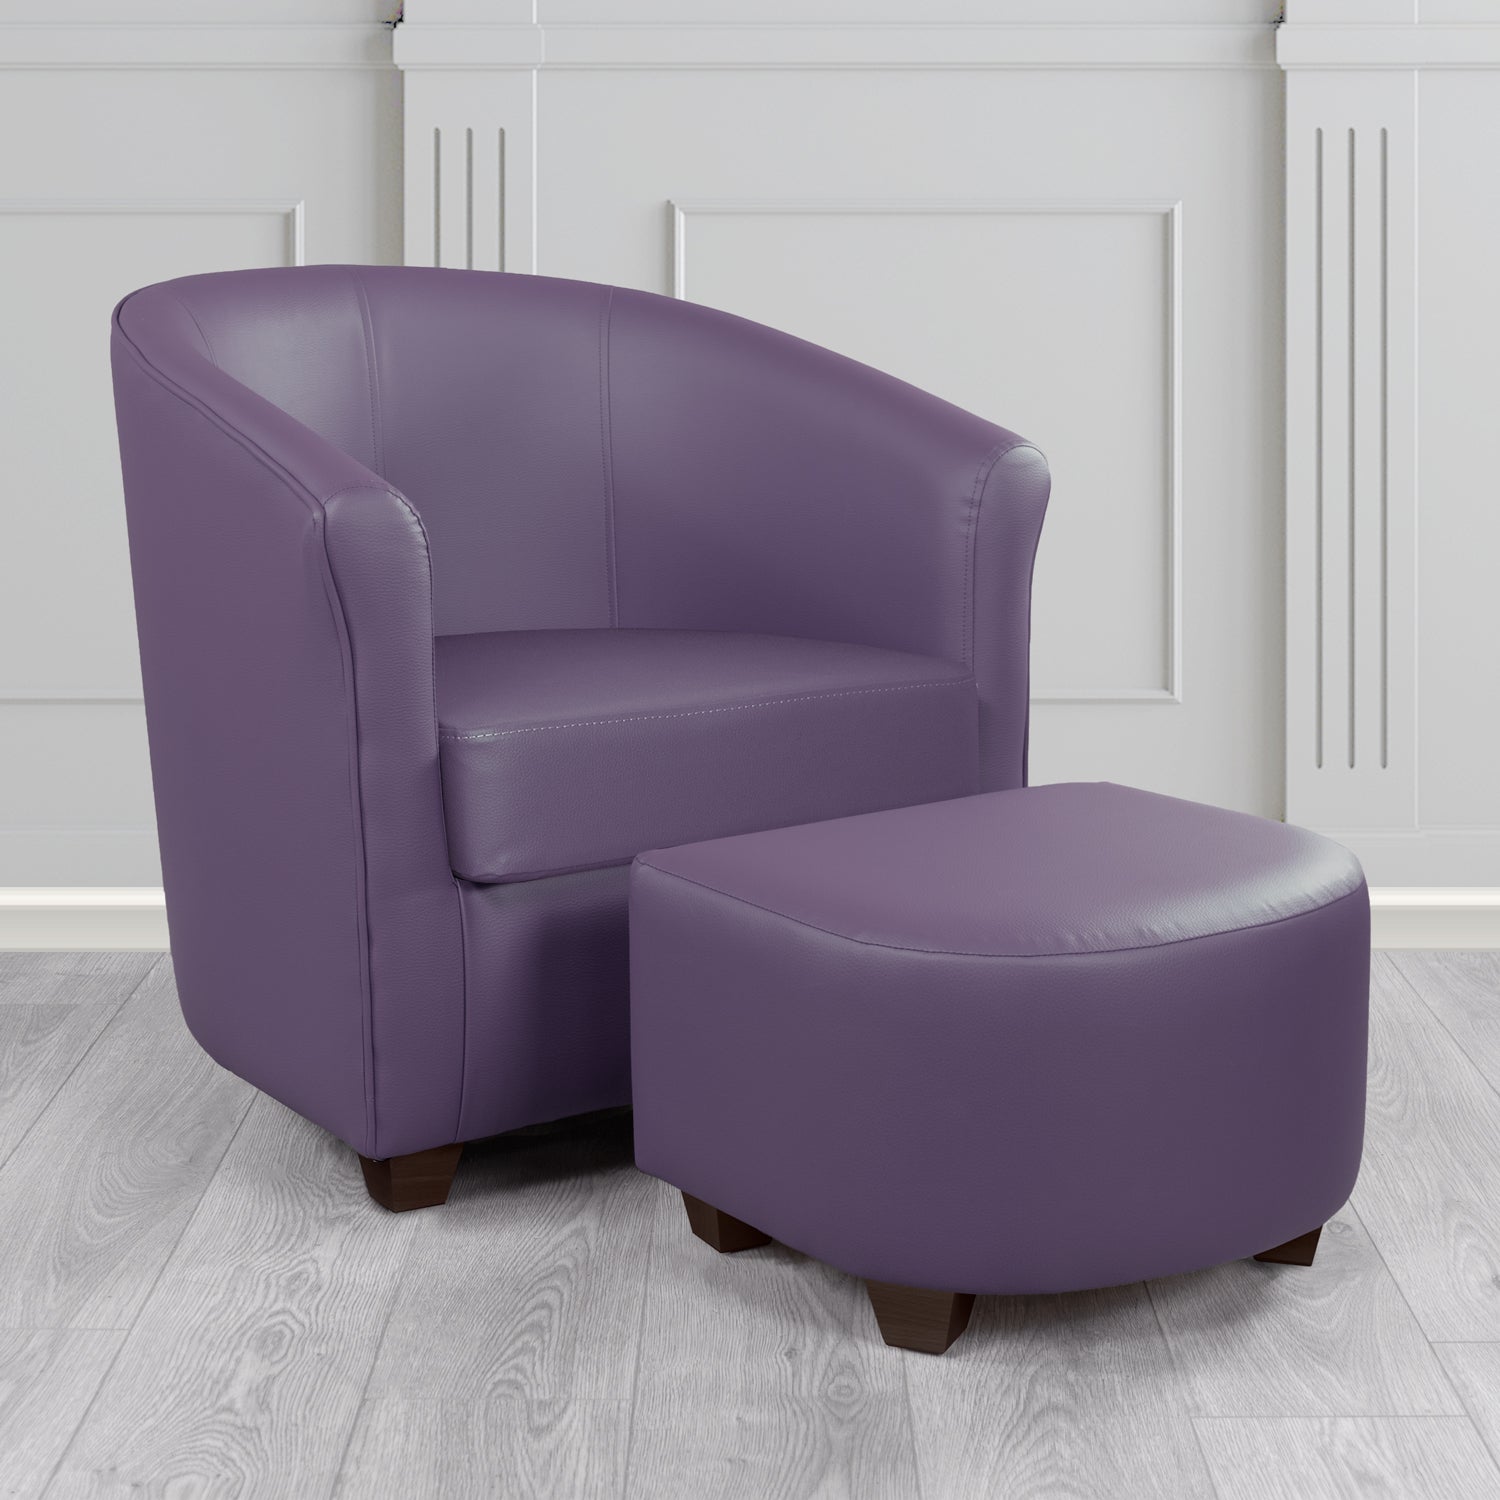 Cannes Tub Chair with Footstool Set in Just Colour Professor Plum Crib 5 Faux Leather - The Tub Chair Shop